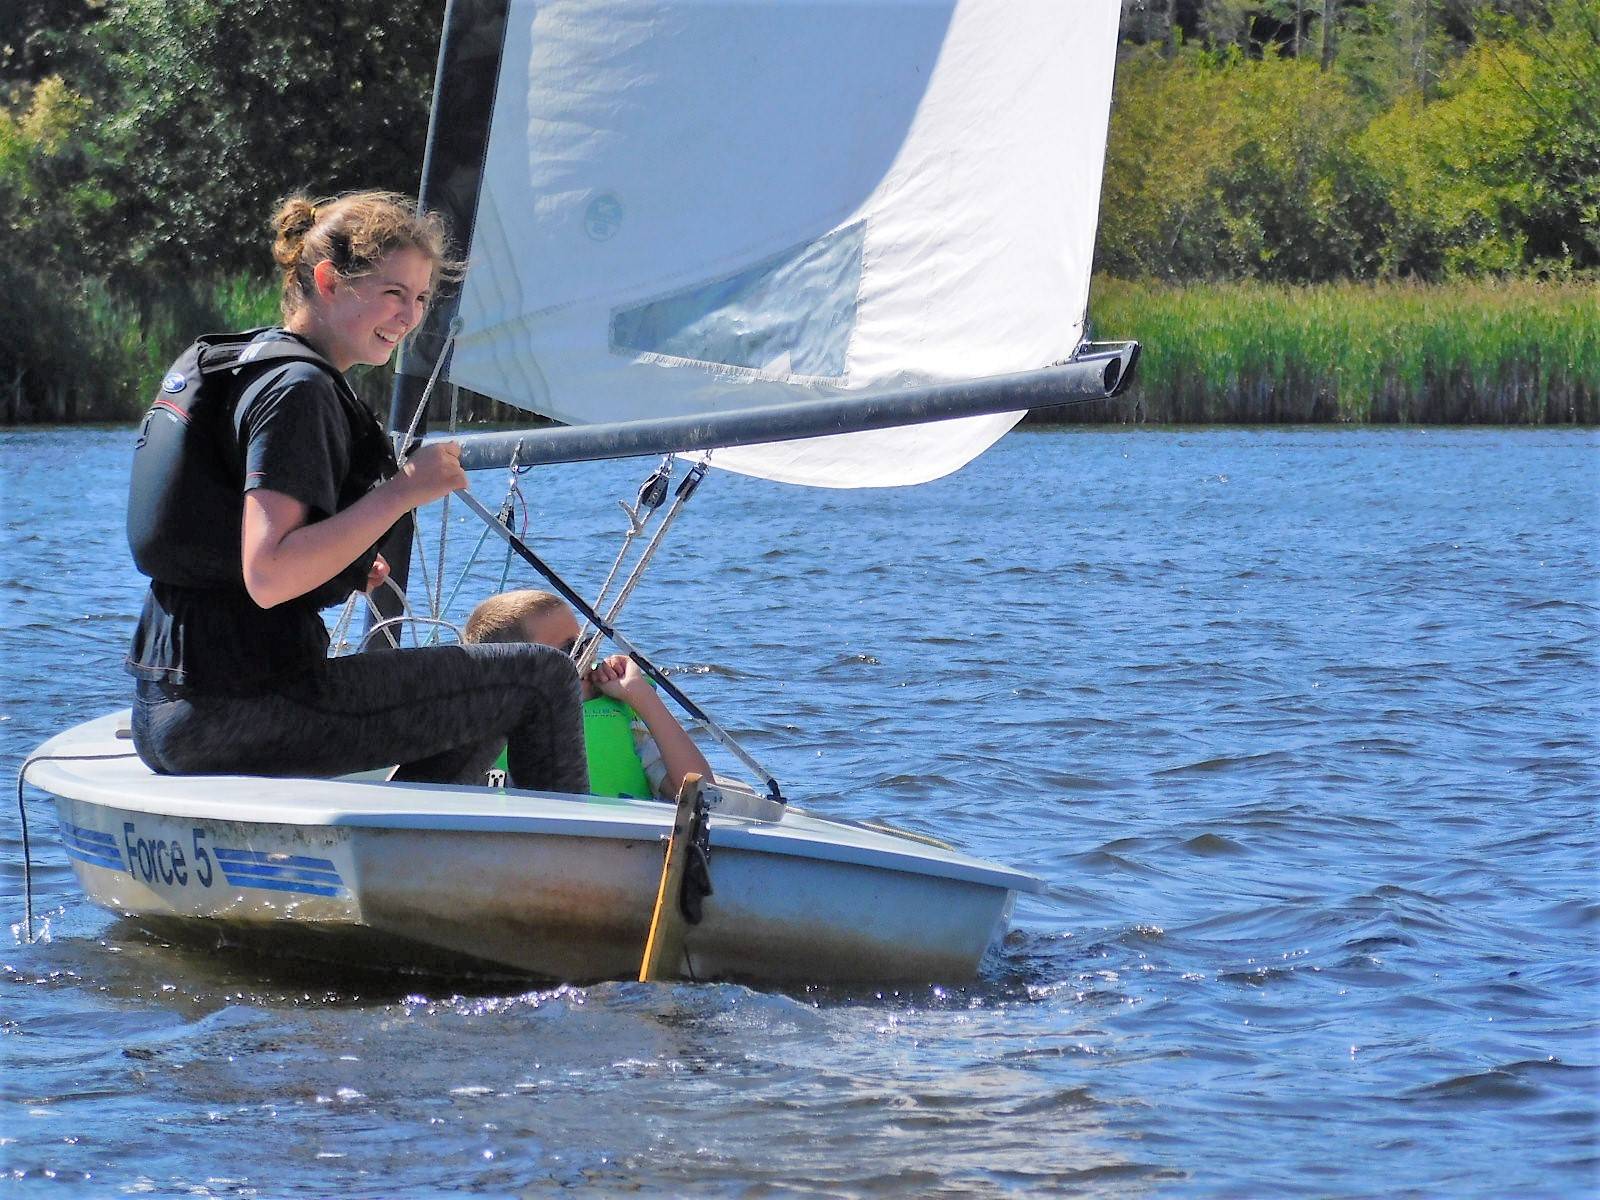 Island Rec offers sailing classes for youth and adults